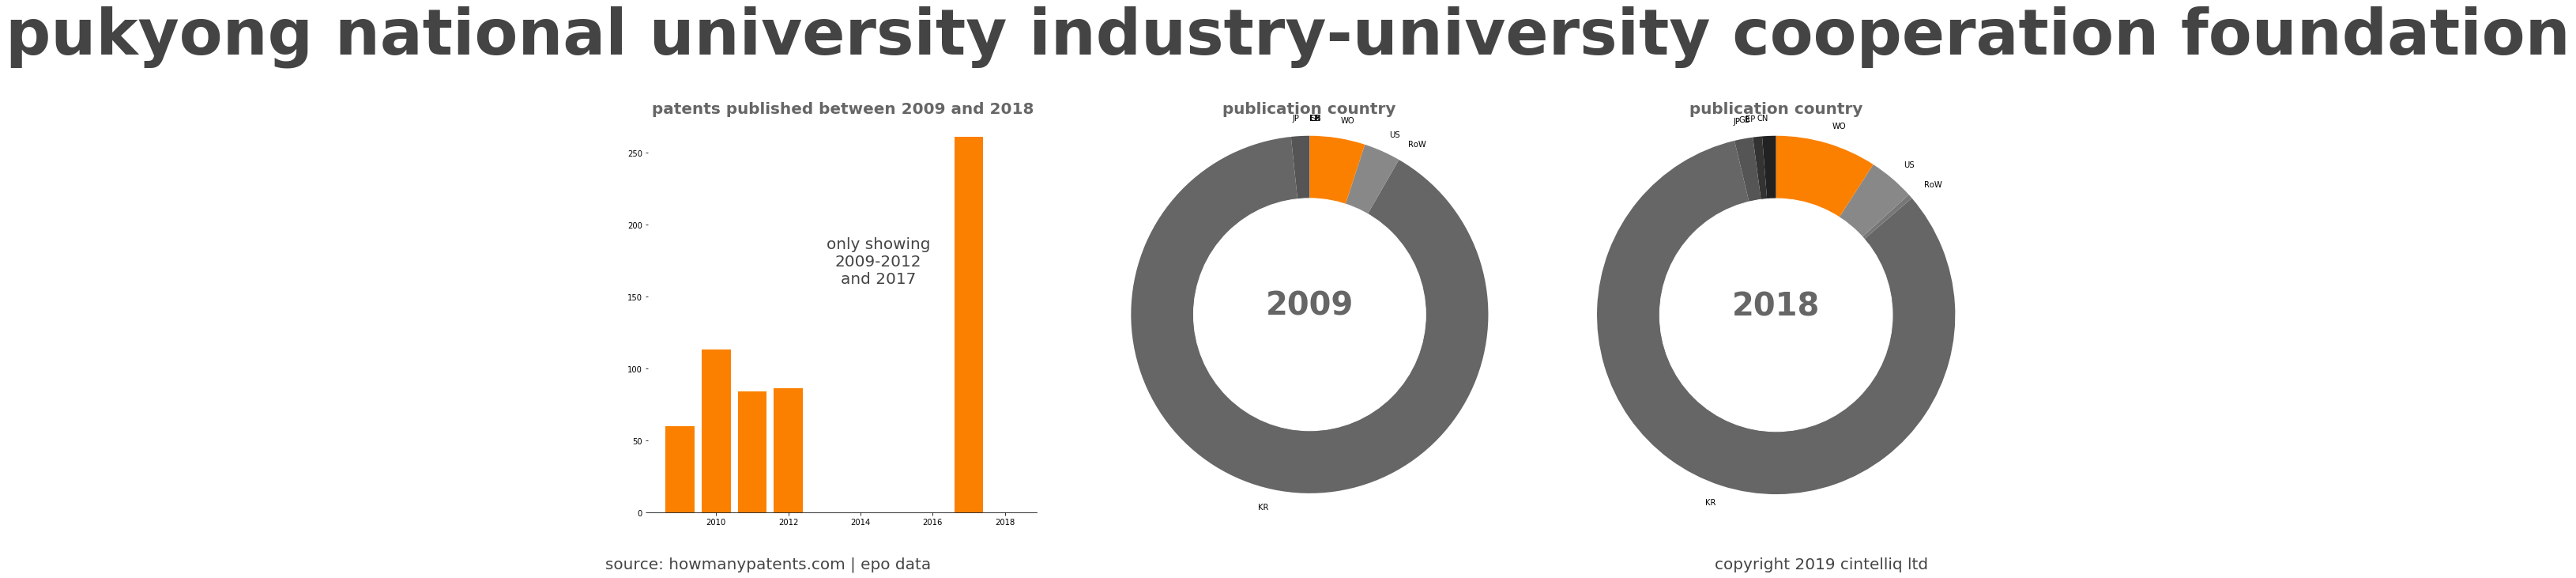 summary of patents for Pukyong National University Industry-University Cooperation Foundation